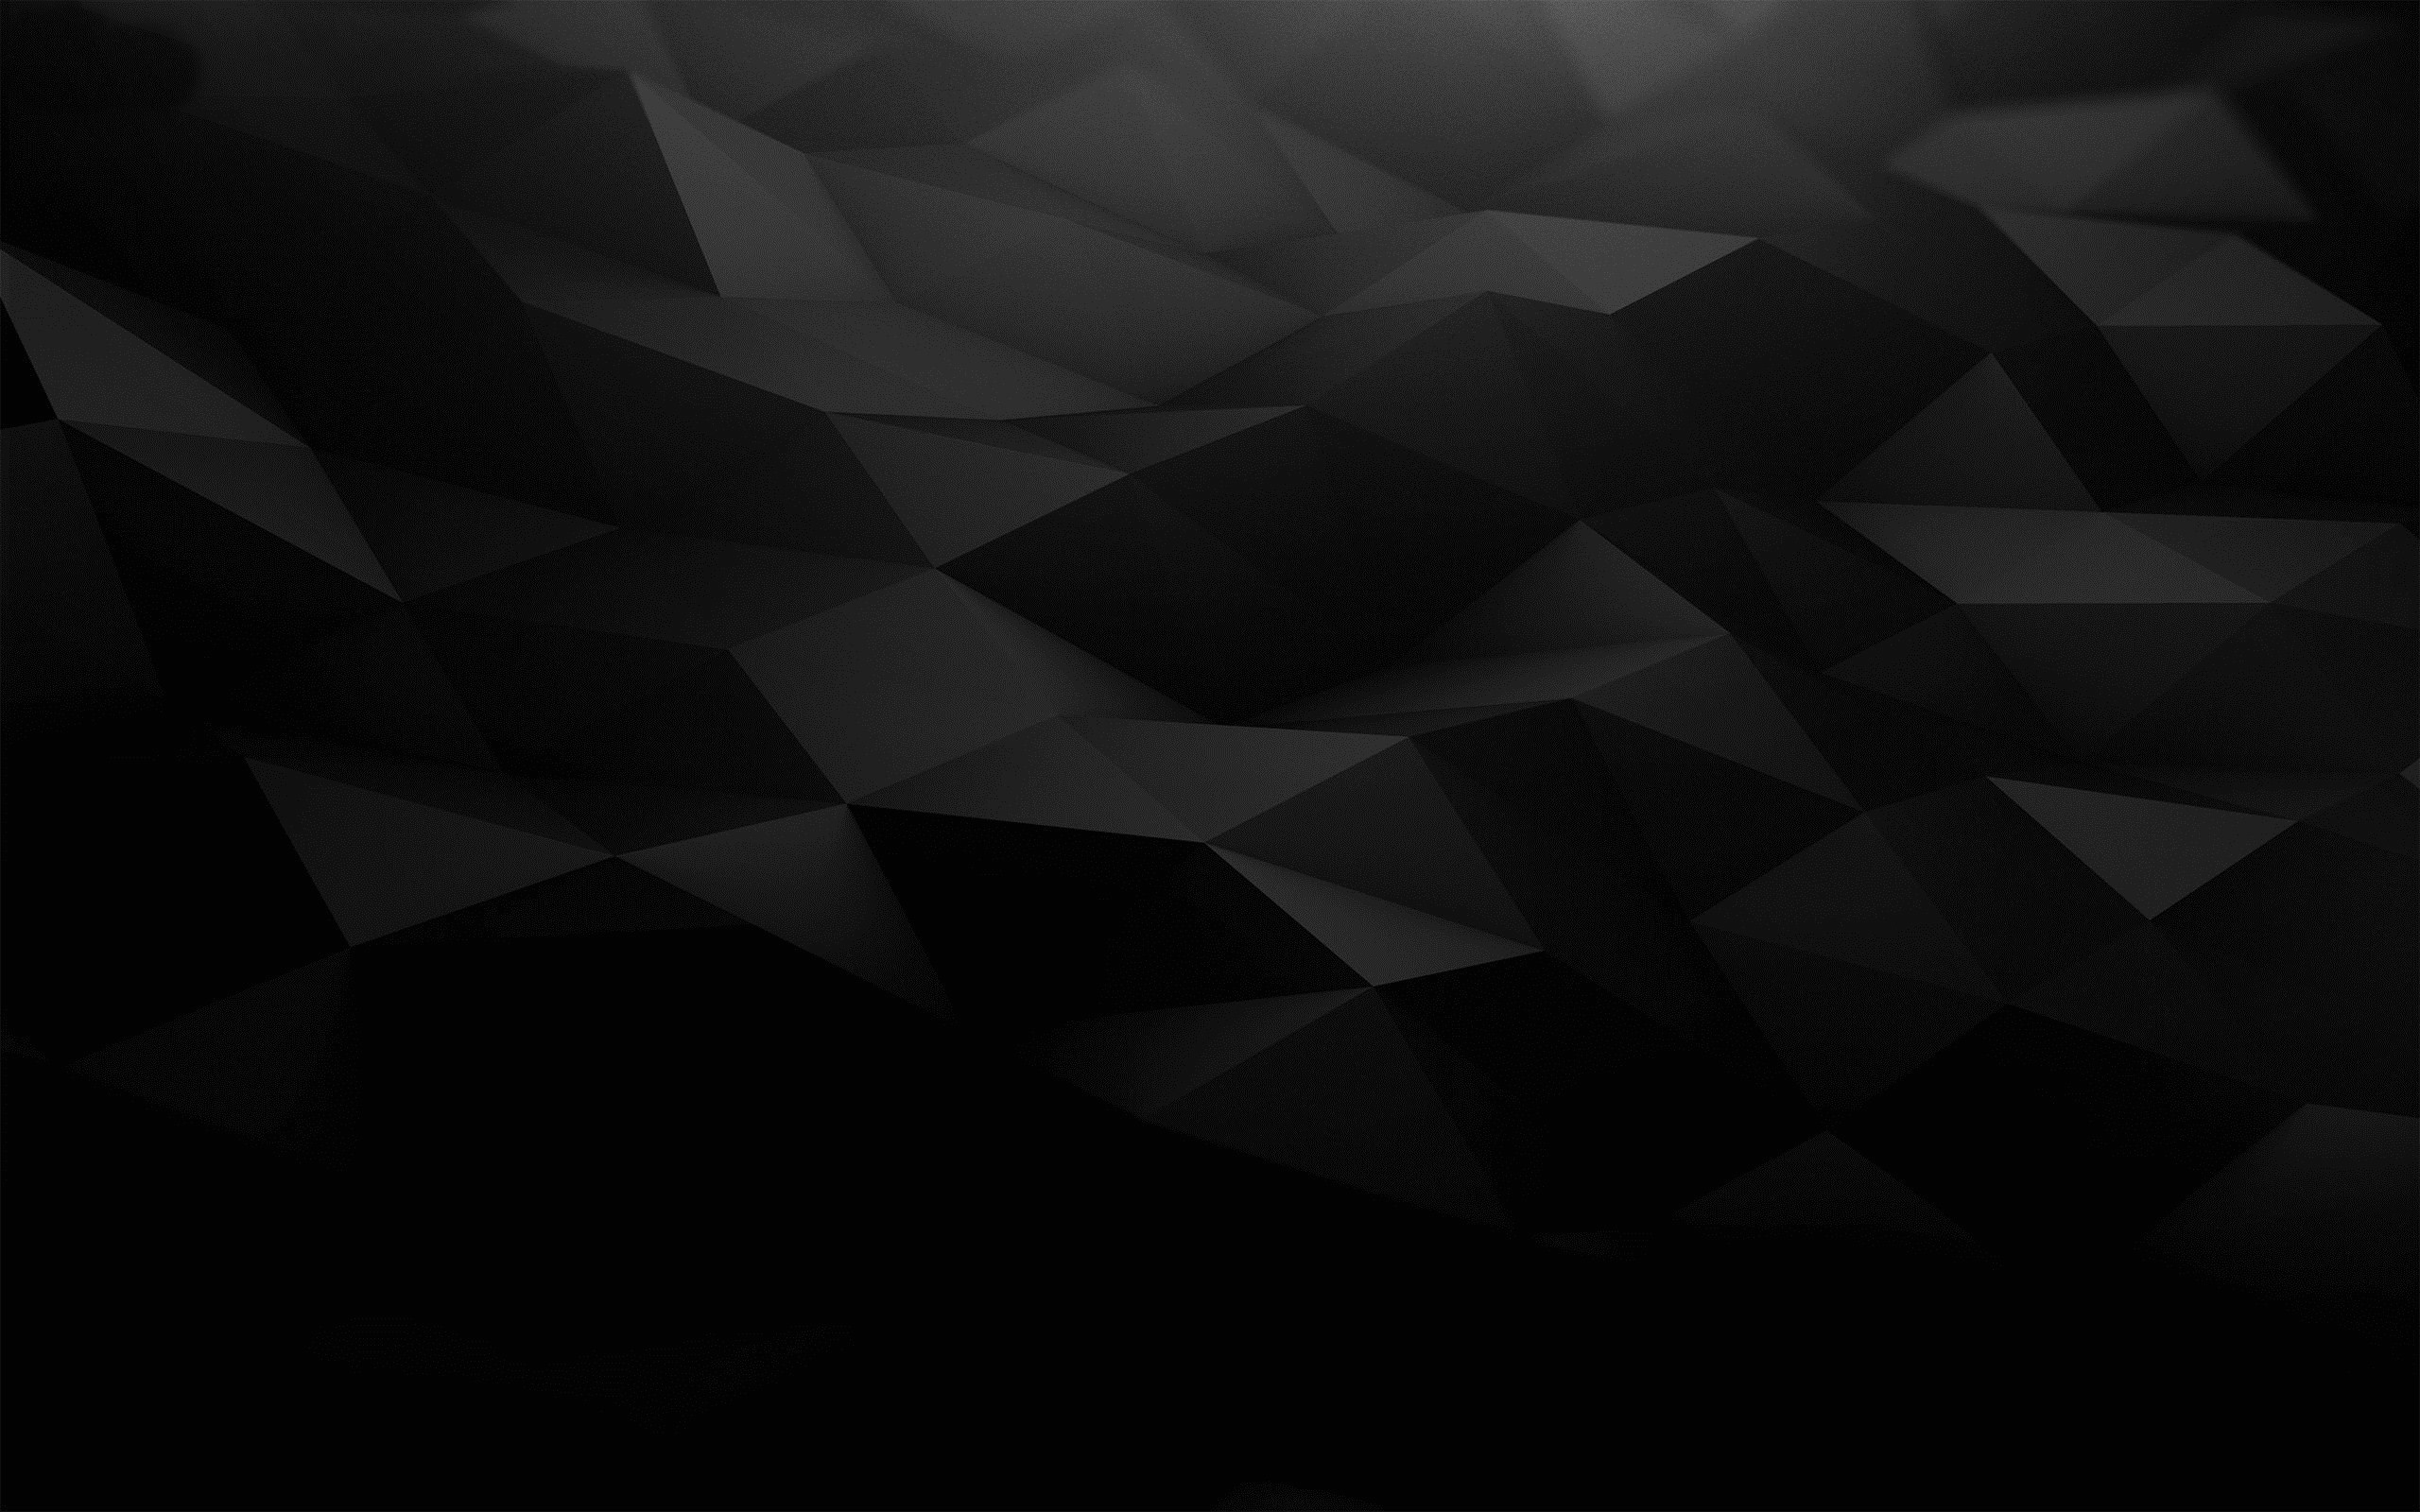 2560x1600, Black Abstract Wallpaper For Iphone Data - High Resolution Black  Abstract Background - 2560x1600 Wallpaper 